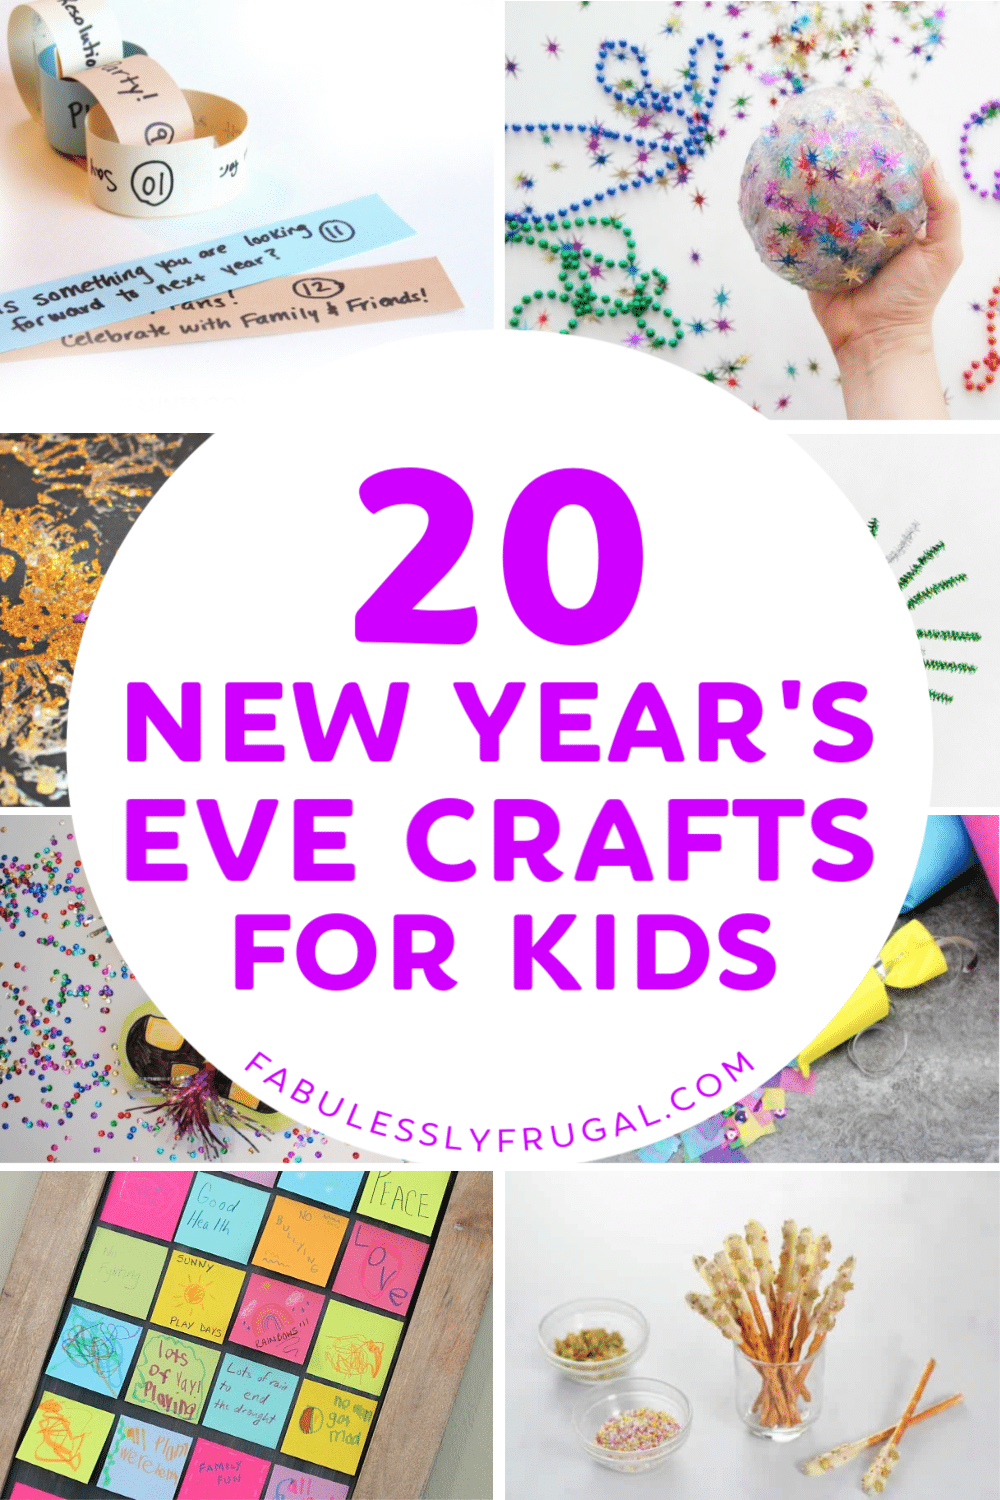 New Year's Eve crafts for kids